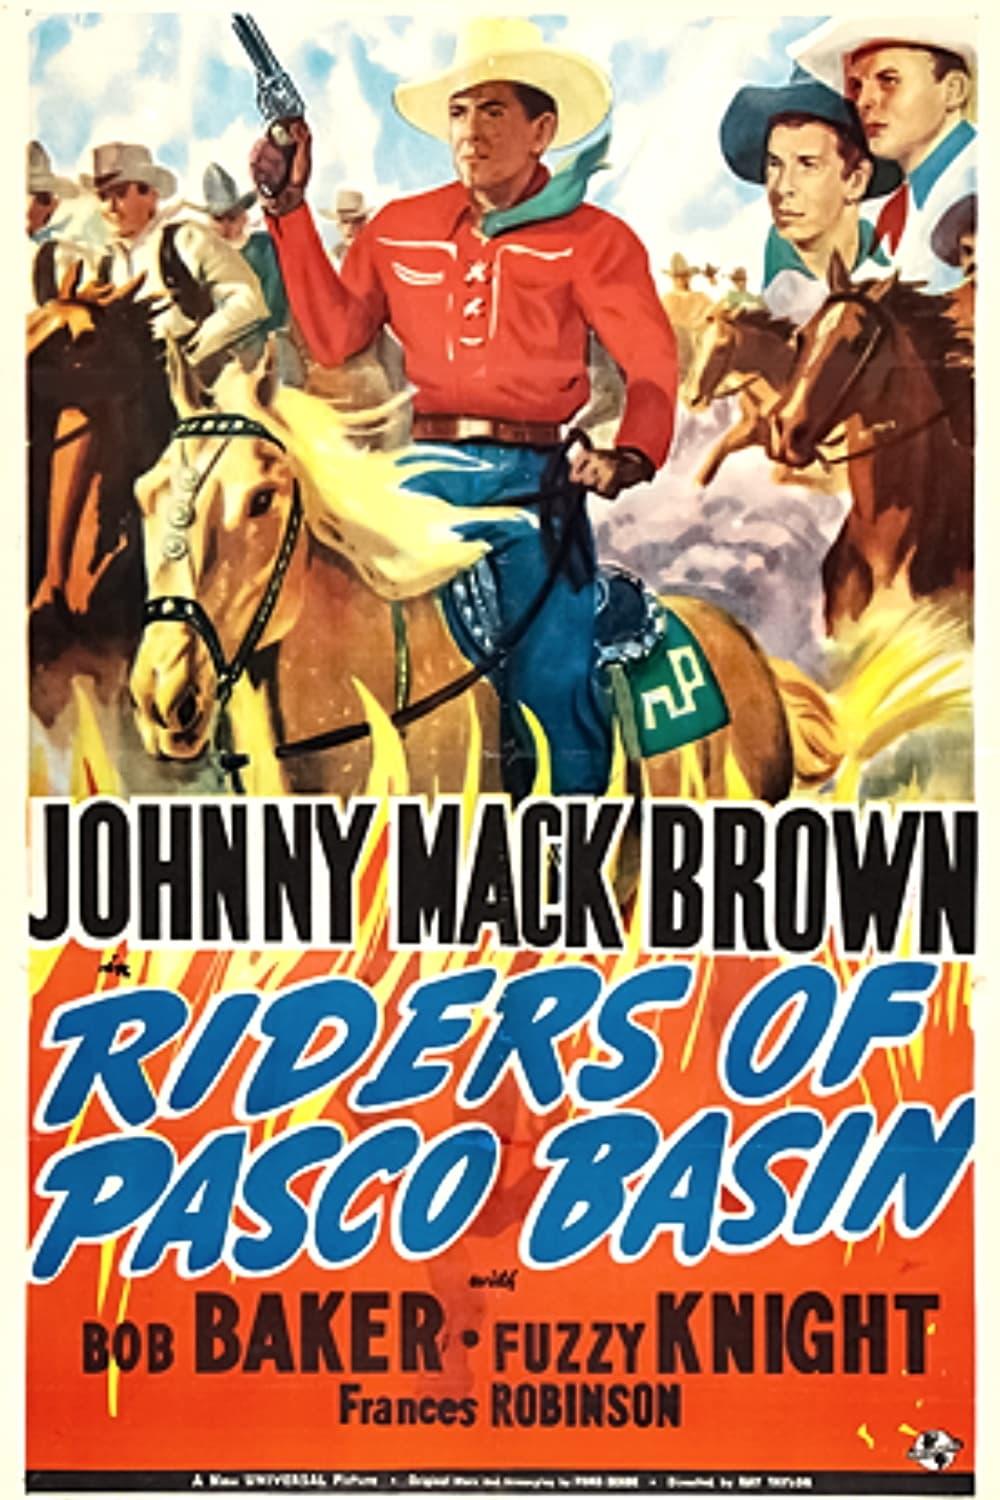 Riders of Pasco Basin poster